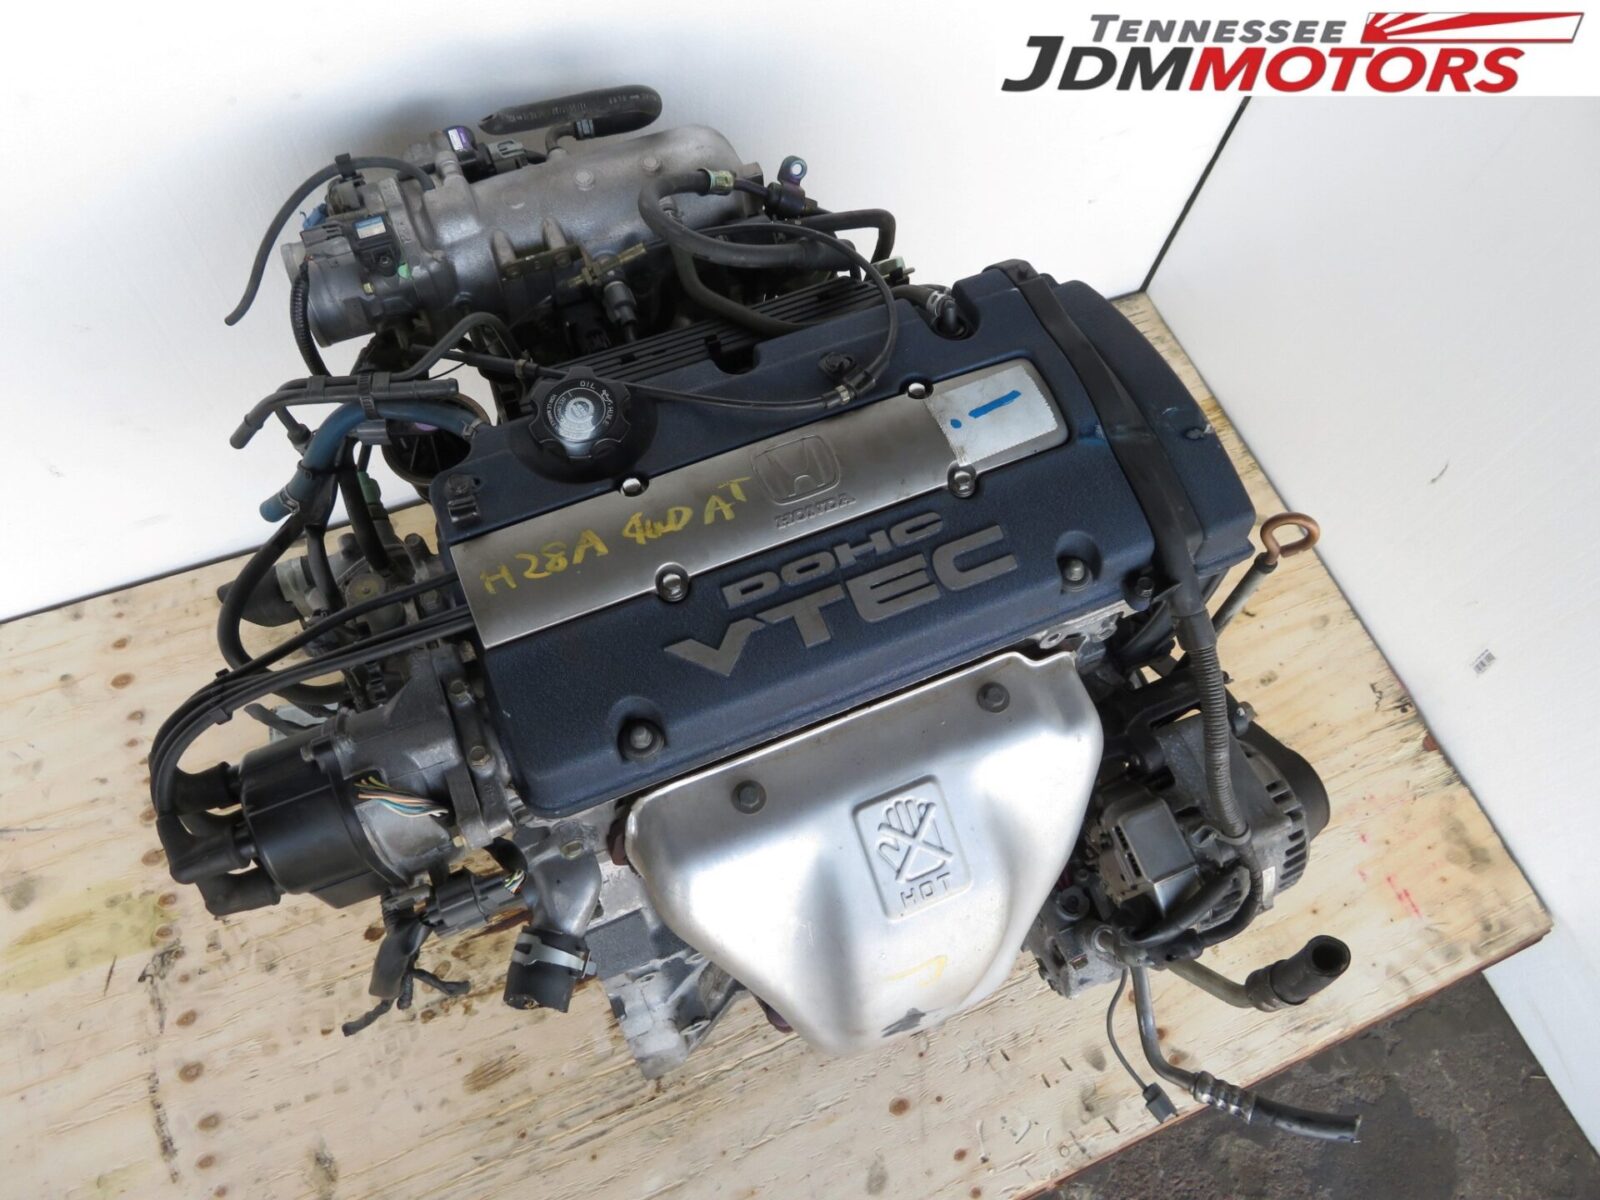 Jdm H23a Blue Top 98 02 Accord Sir 97 01 Honda Prelude Euro R 2 3l Engine Only H23a Pde Head Tennessee Jdm Motors